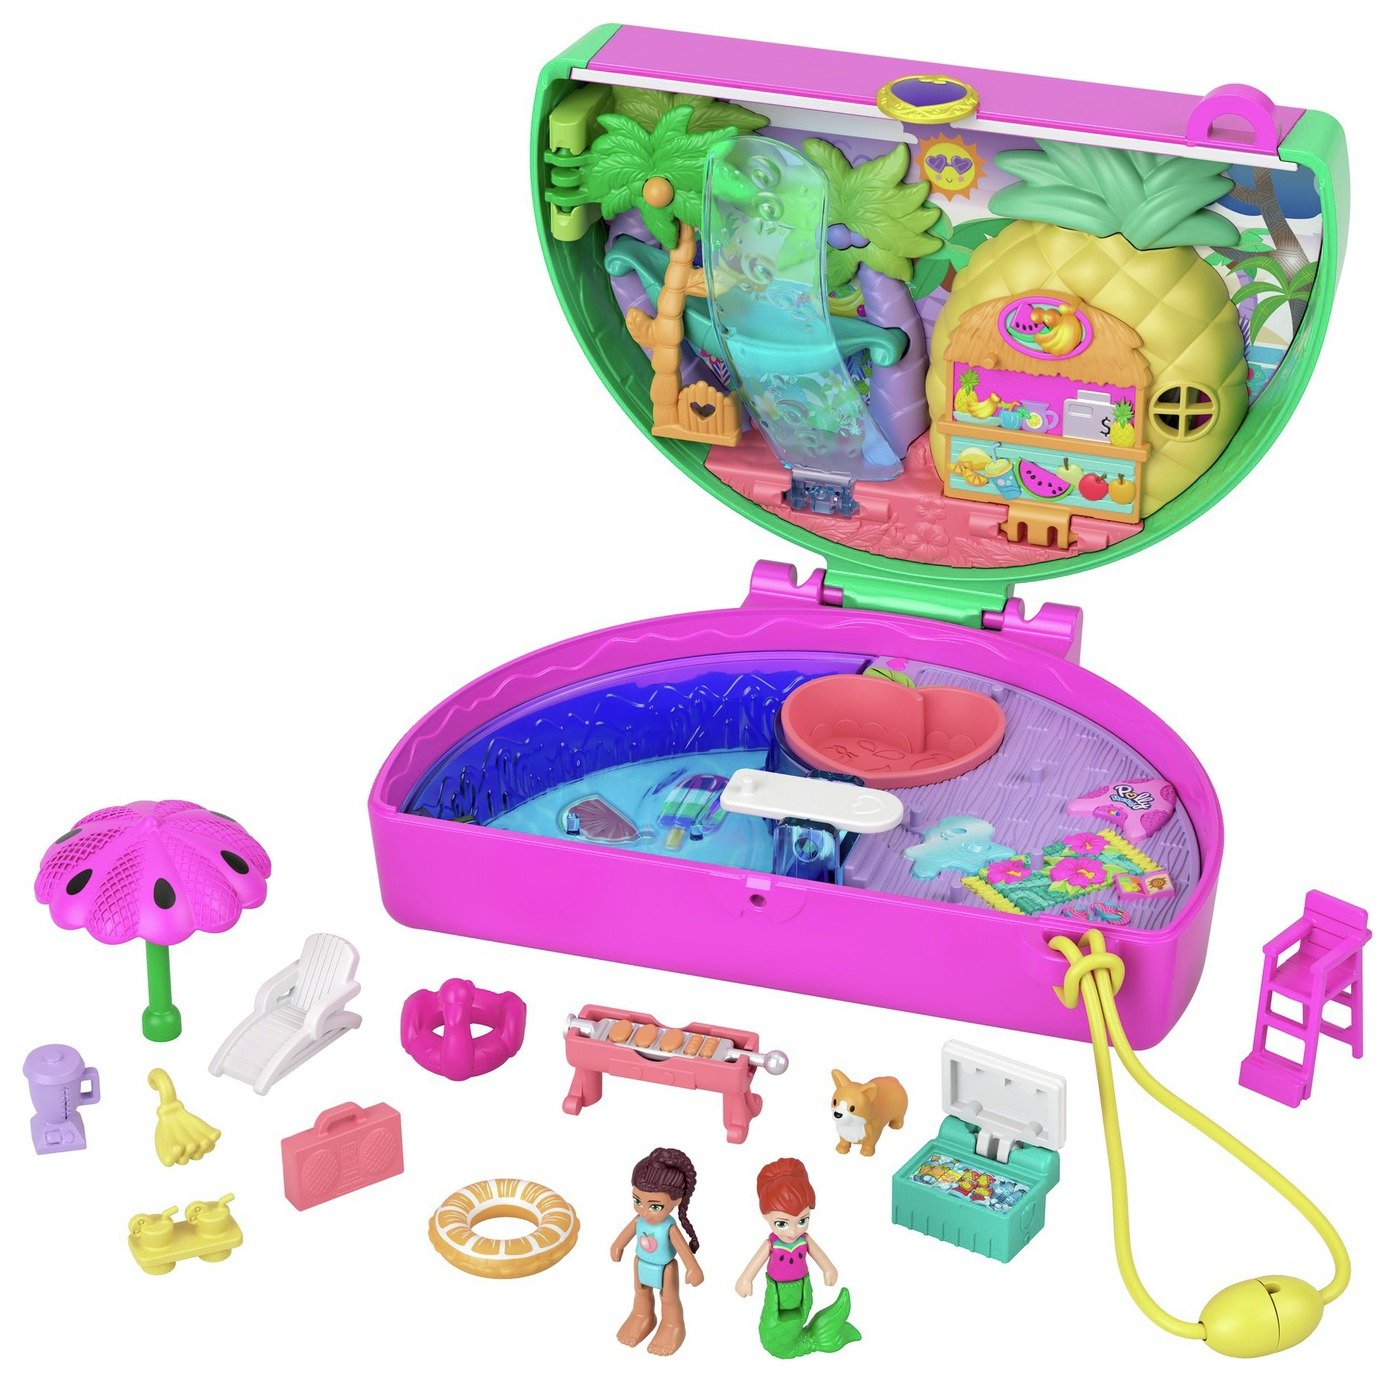 Polly Pocket Watermelon Pool Party Compact review